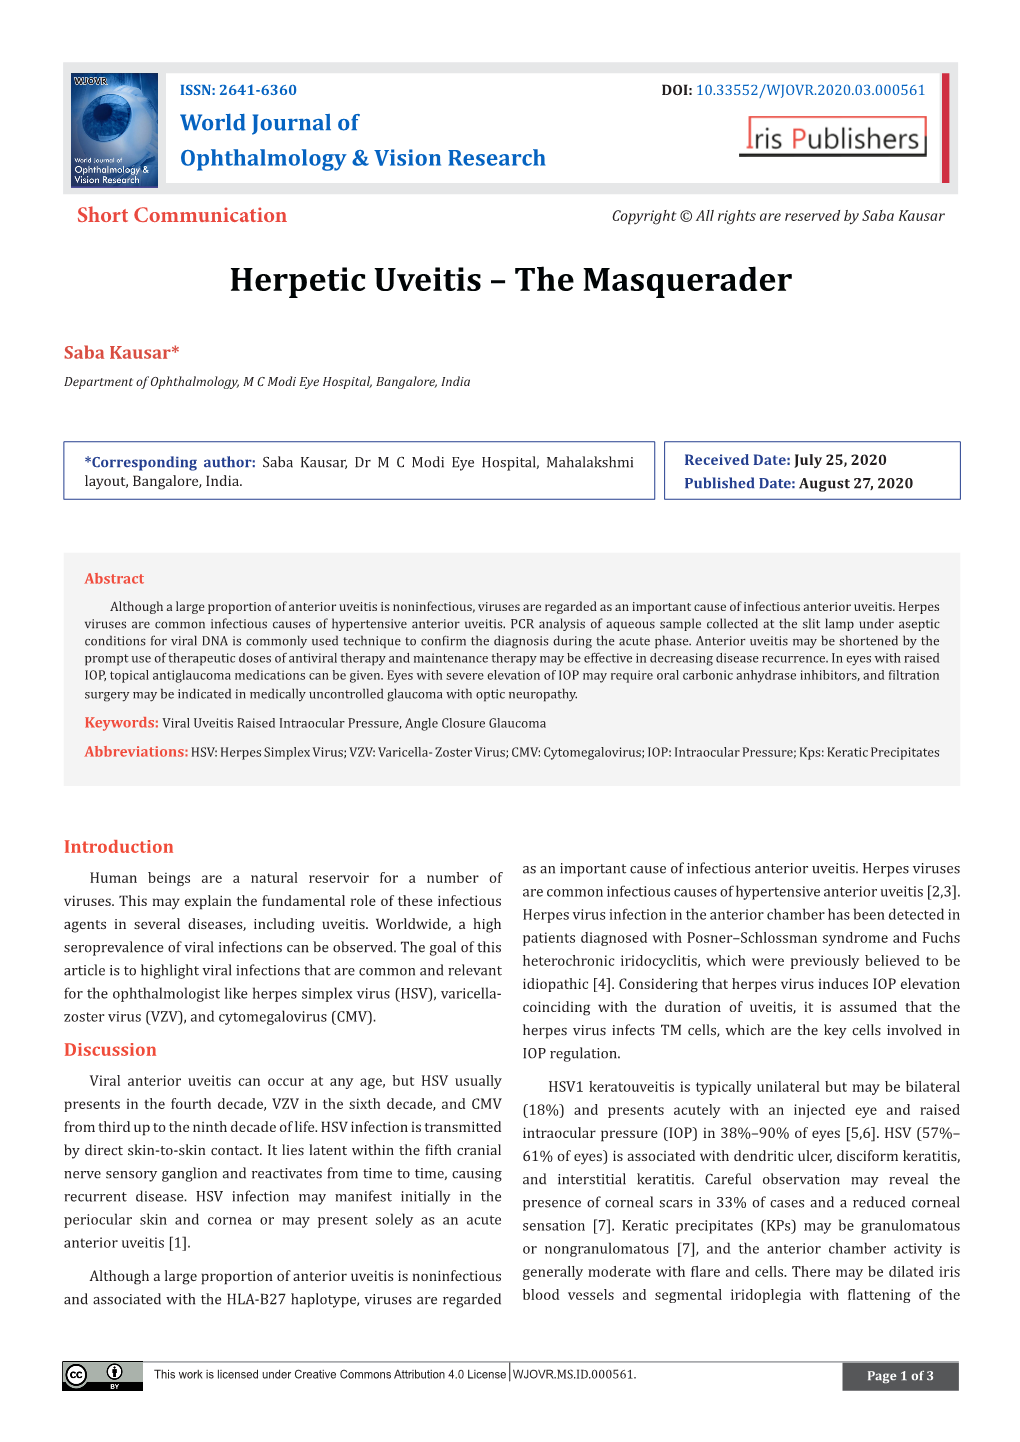 Herpetic Uveitis – the Masquerader